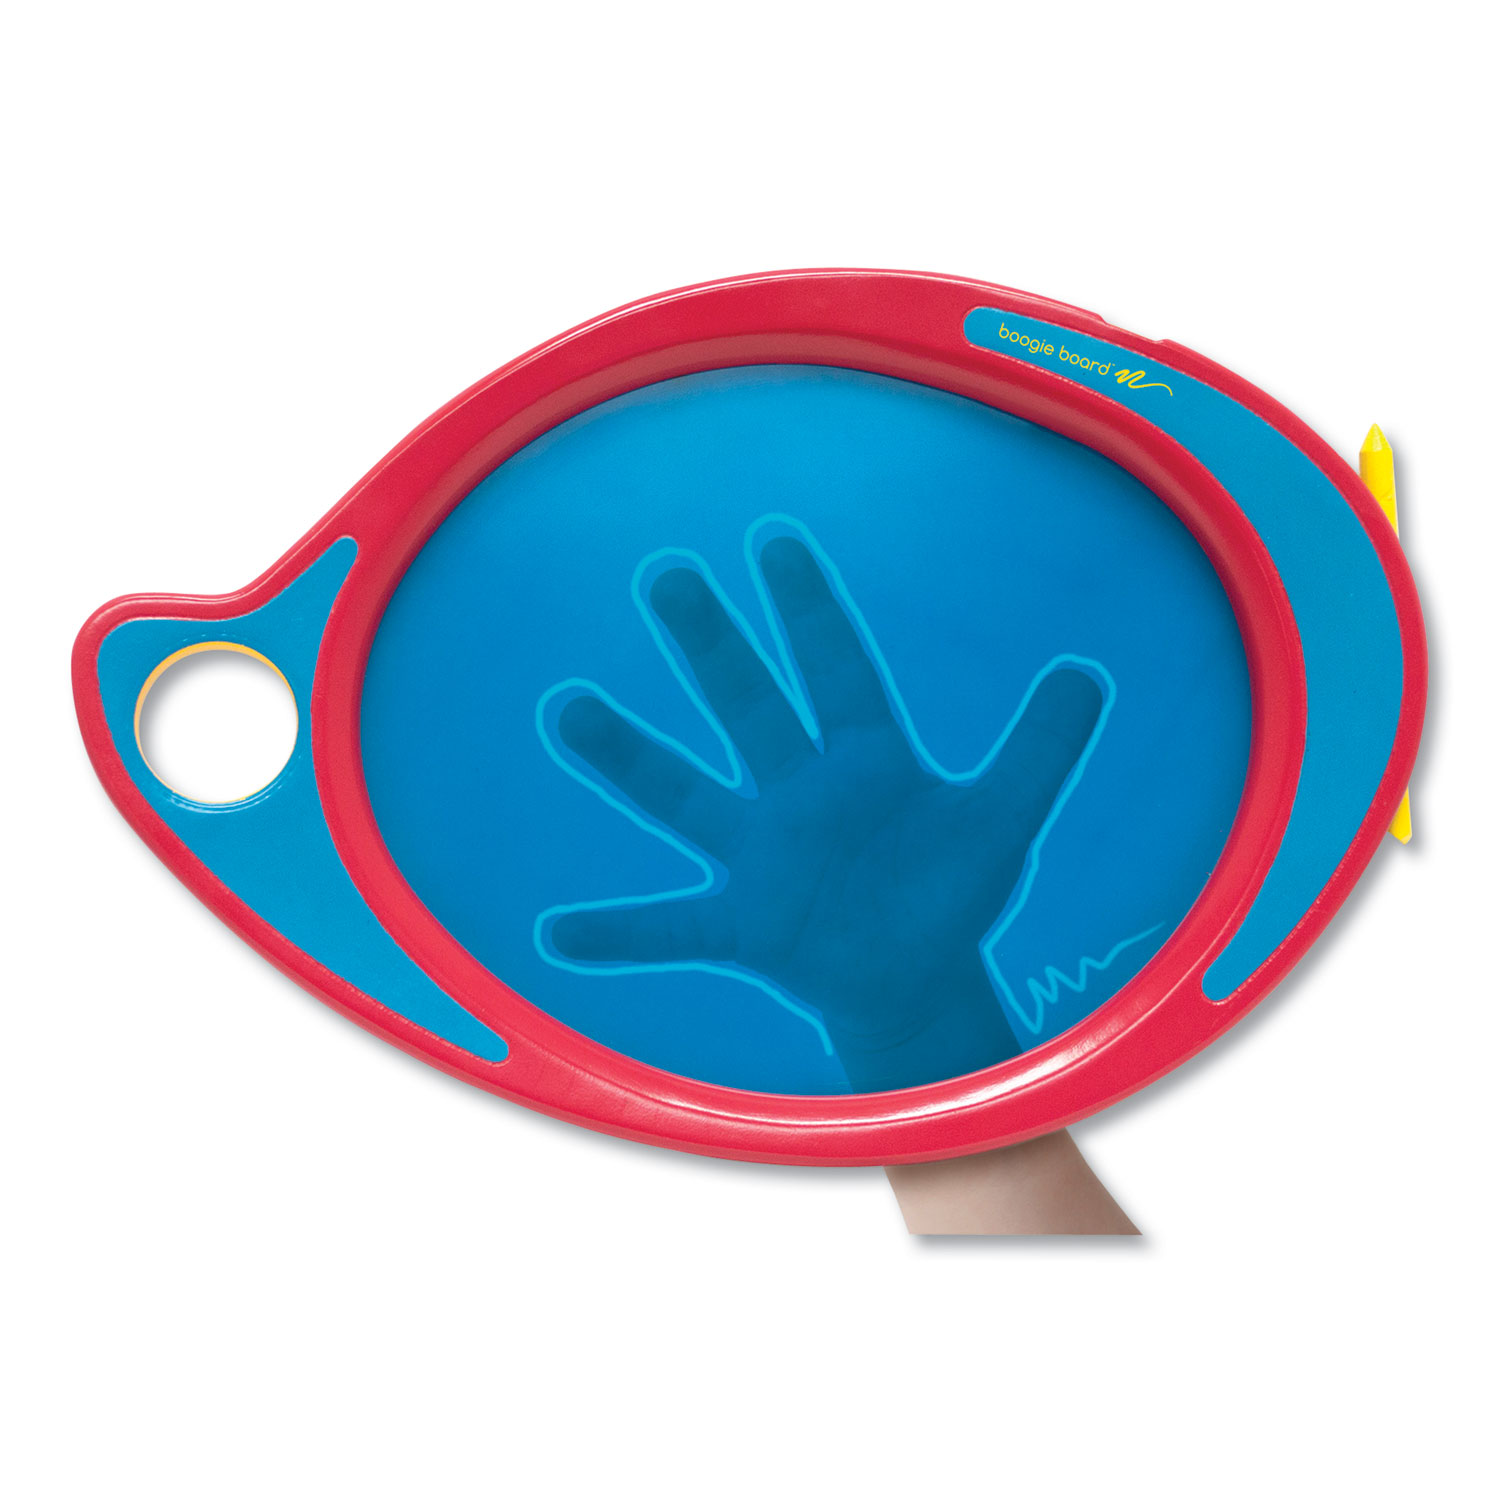  Boogie Board PL0310002 Play N' Trace, 8.5 x 8.25 Screen, Blue/Red (IMV03100022) 